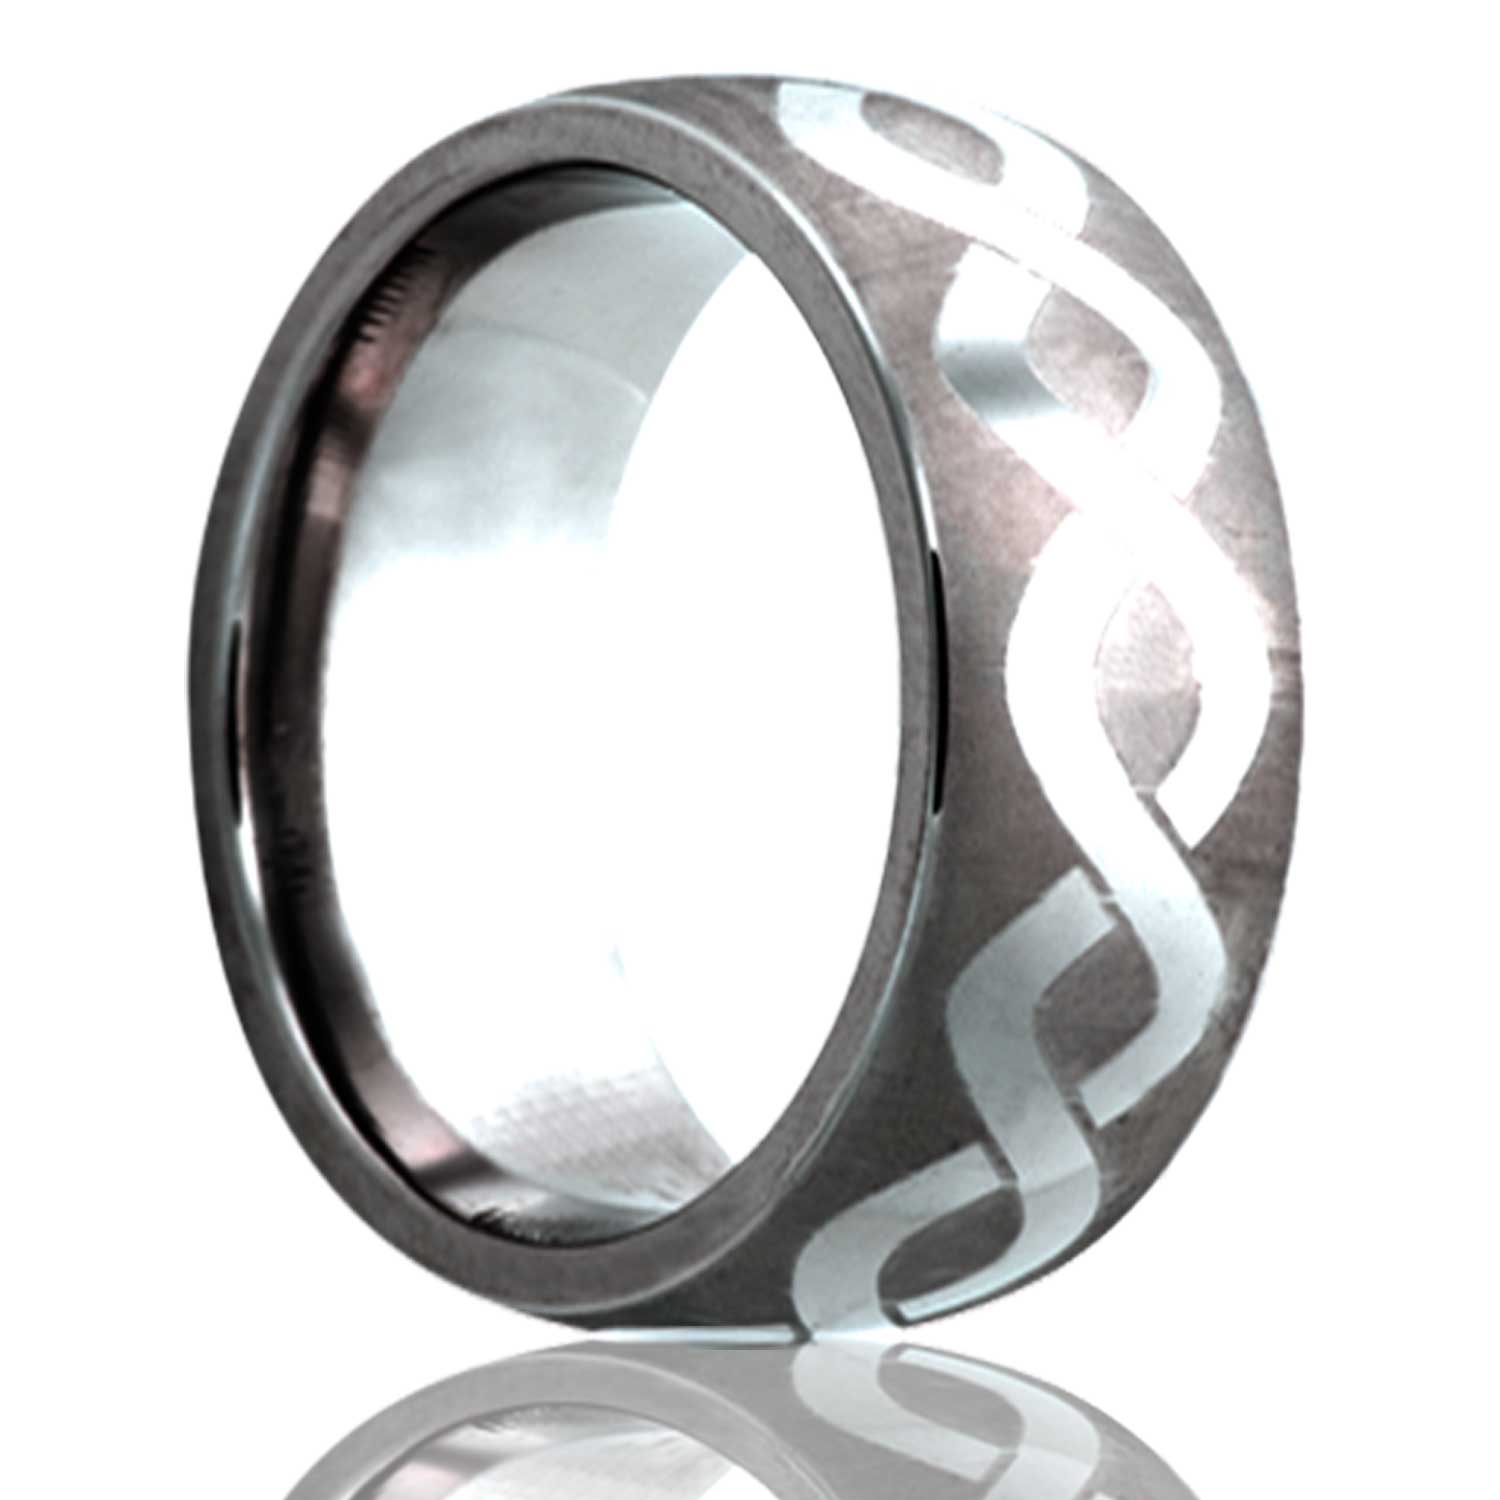 A infinity waves engraved domed titanium wedding band displayed on a neutral white background.